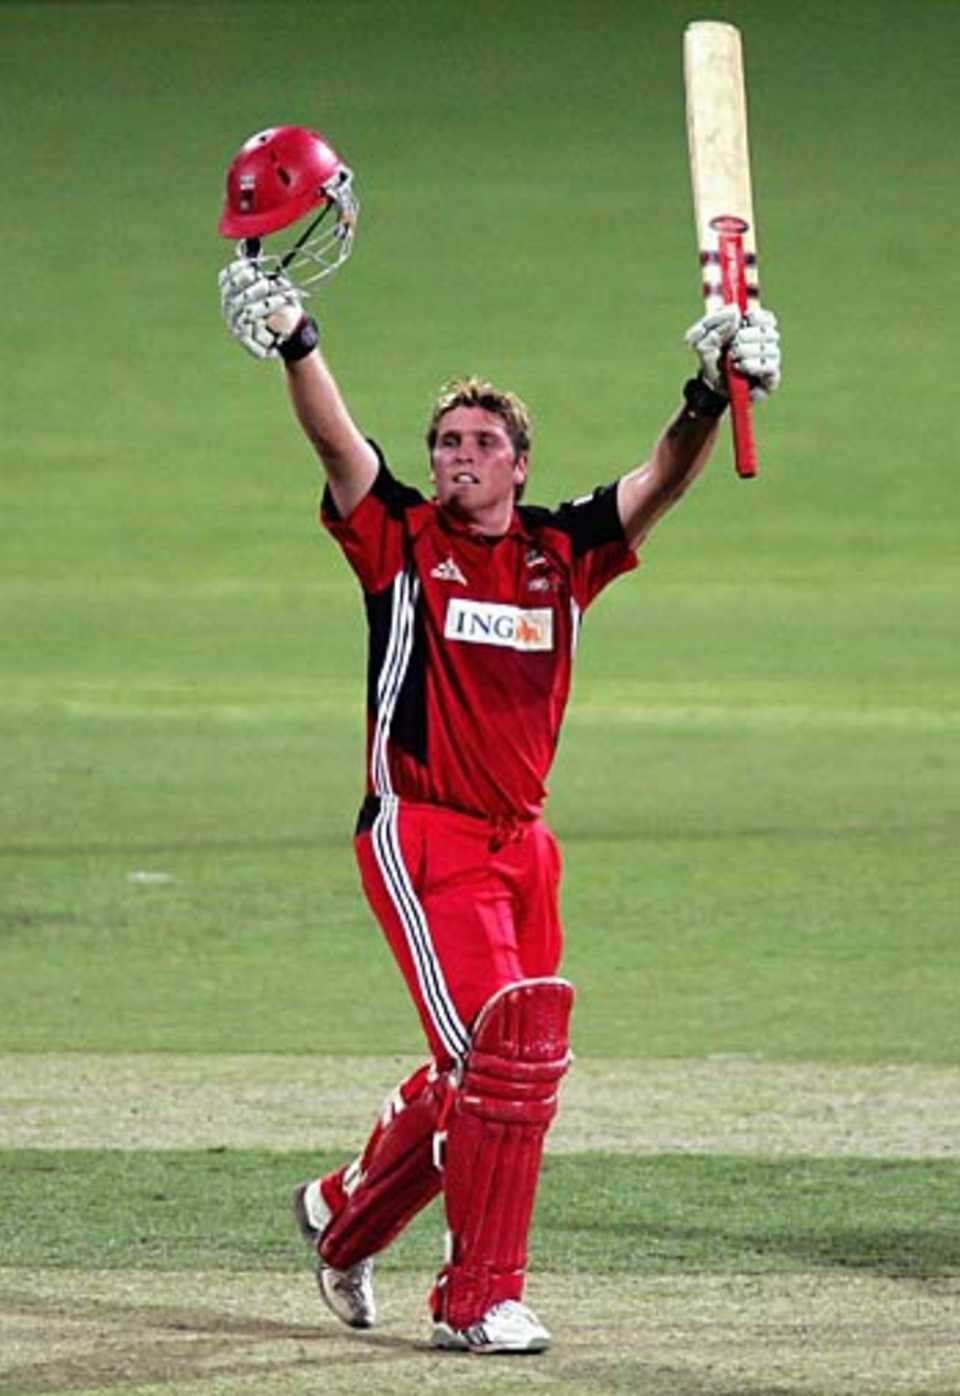 Mark Cosgrove celebrates an outstanding century in his comeback match, South Australia v Queensland, ING Cup, Adelaide Oval, November 4, 2005